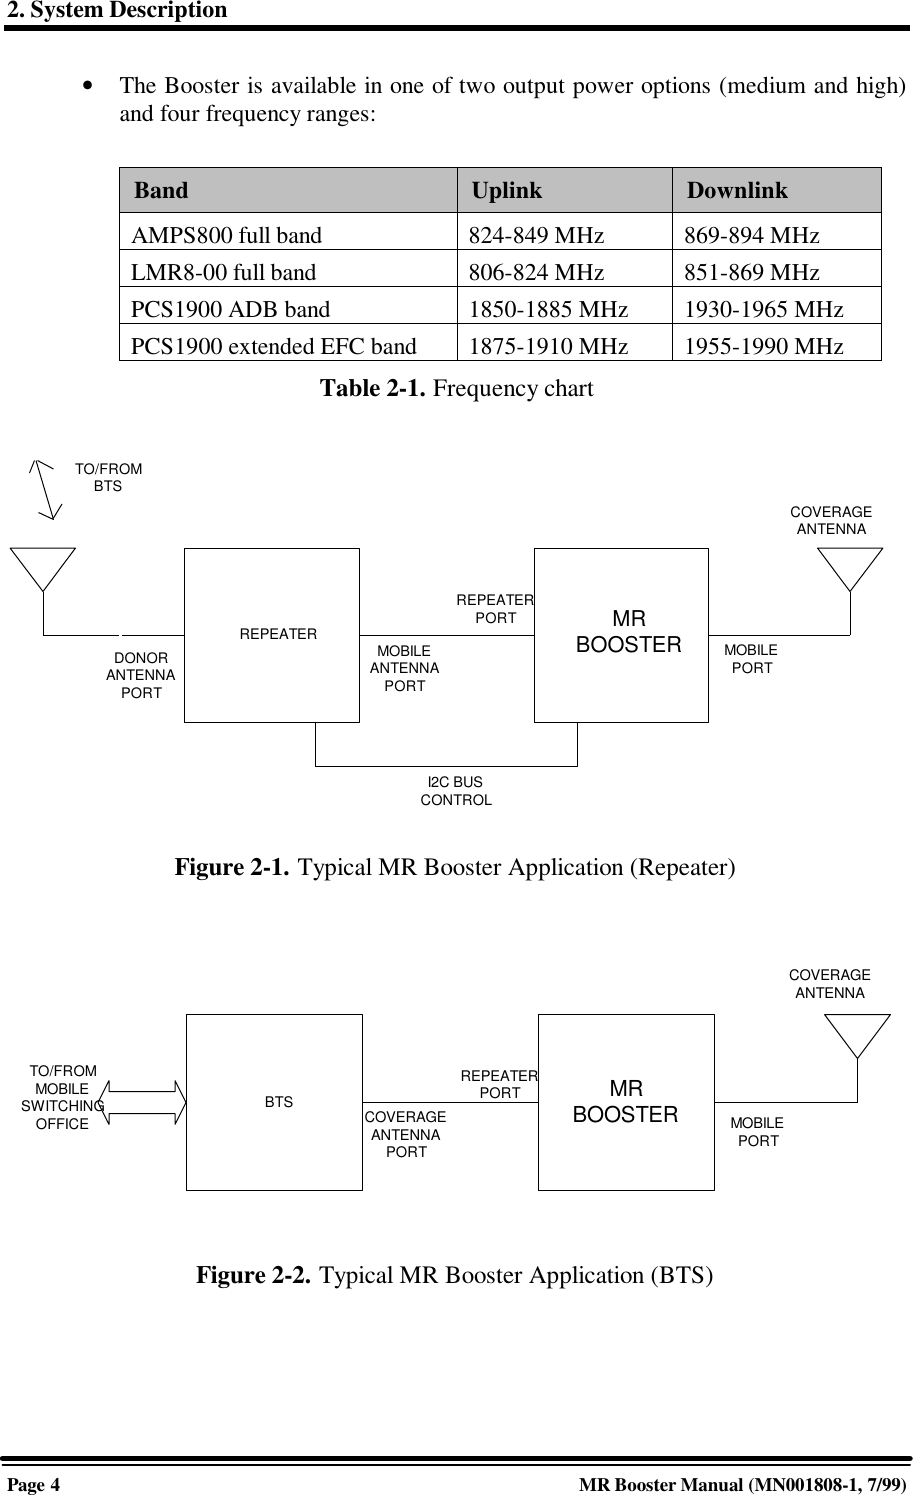 2. System DescriptionPage 4MR Booster Manual (MN001808-1, 7/99)• The Booster is available in one of two output power options (medium and high)and four frequency ranges:Band Uplink DownlinkAMPS800 full band 824-849 MHz 869-894 MHzLMR8-00 full band 806-824 MHz 851-869 MHzPCS1900 ADB band 1850-1885 MHz 1930-1965 MHzPCS1900 extended EFC band 1875-1910 MHz 1955-1990 MHzTable 2-1. Frequency chartREPEATERDONORANTENNAPORTMOBILEANTENNAPORTREPEATERPORTTO/FROMBTSMRBOOSTER MOBILEPORTCOVERAGEANTENNAI2C BUSCONTROLFigure 2-1. Typical MR Booster Application (Repeater)MRBOOSTERTO/FROMMOBILESWITCHINGOFFICEBTSCOVERAGEANTENNAMOBILEPORTREPEATERPORTCOVERAGEANTENNAPORTFigure 2-2. Typical MR Booster Application (BTS)